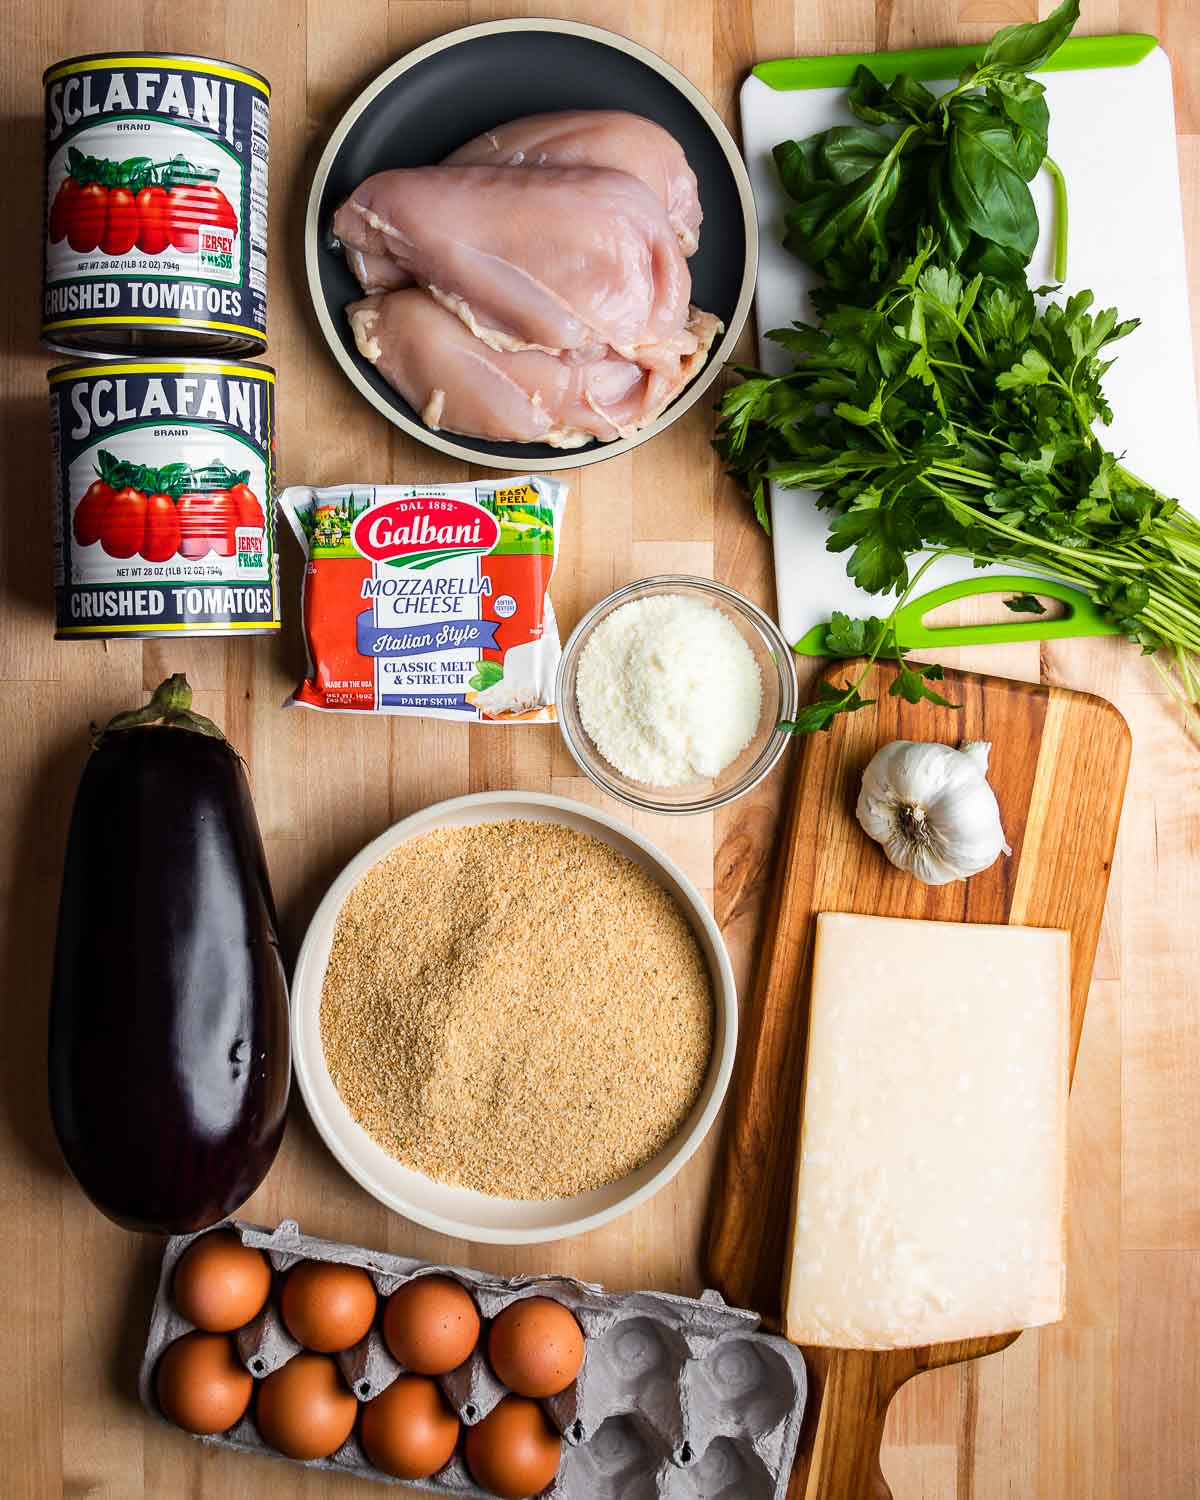 Ingredients shown: tomatoes, chicken, basil, parsley, cheeses, garlic, breadcrumbs, eggplant, and eggs.